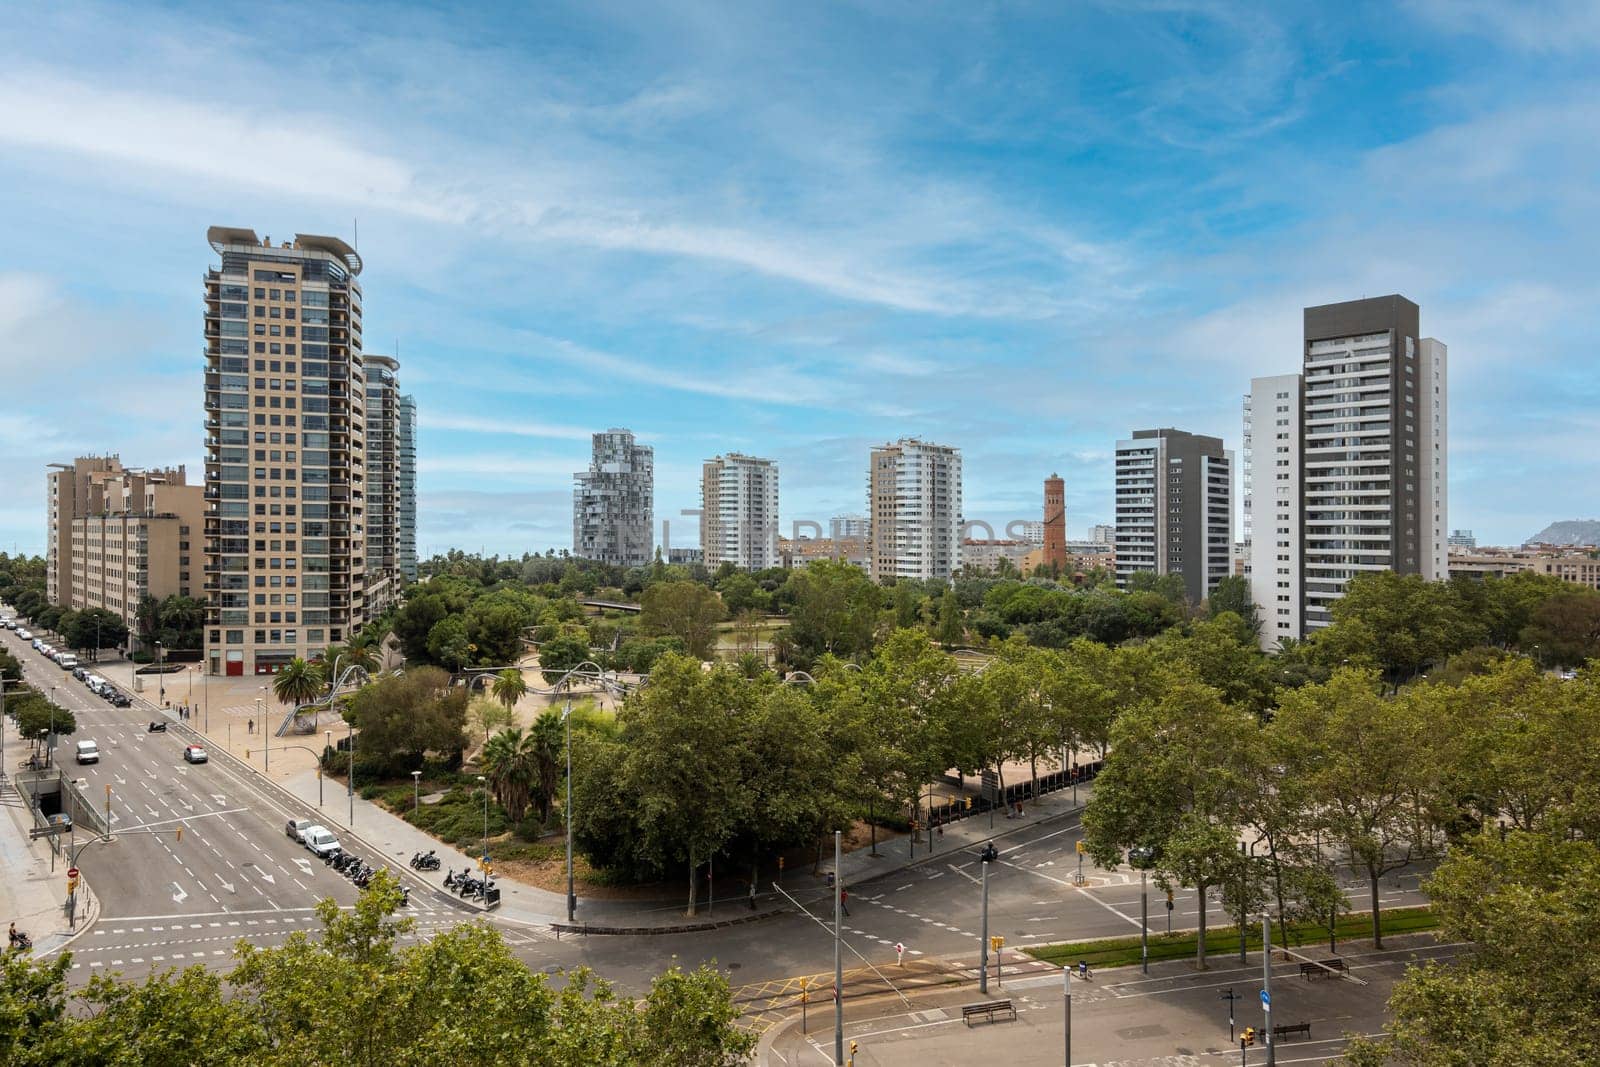 Aerial view of modern high-tech area of Barcelona - Diagonal Mar with high standard of living on the blue sky background. Concept of comfortable life in Spain near the sea by apavlin